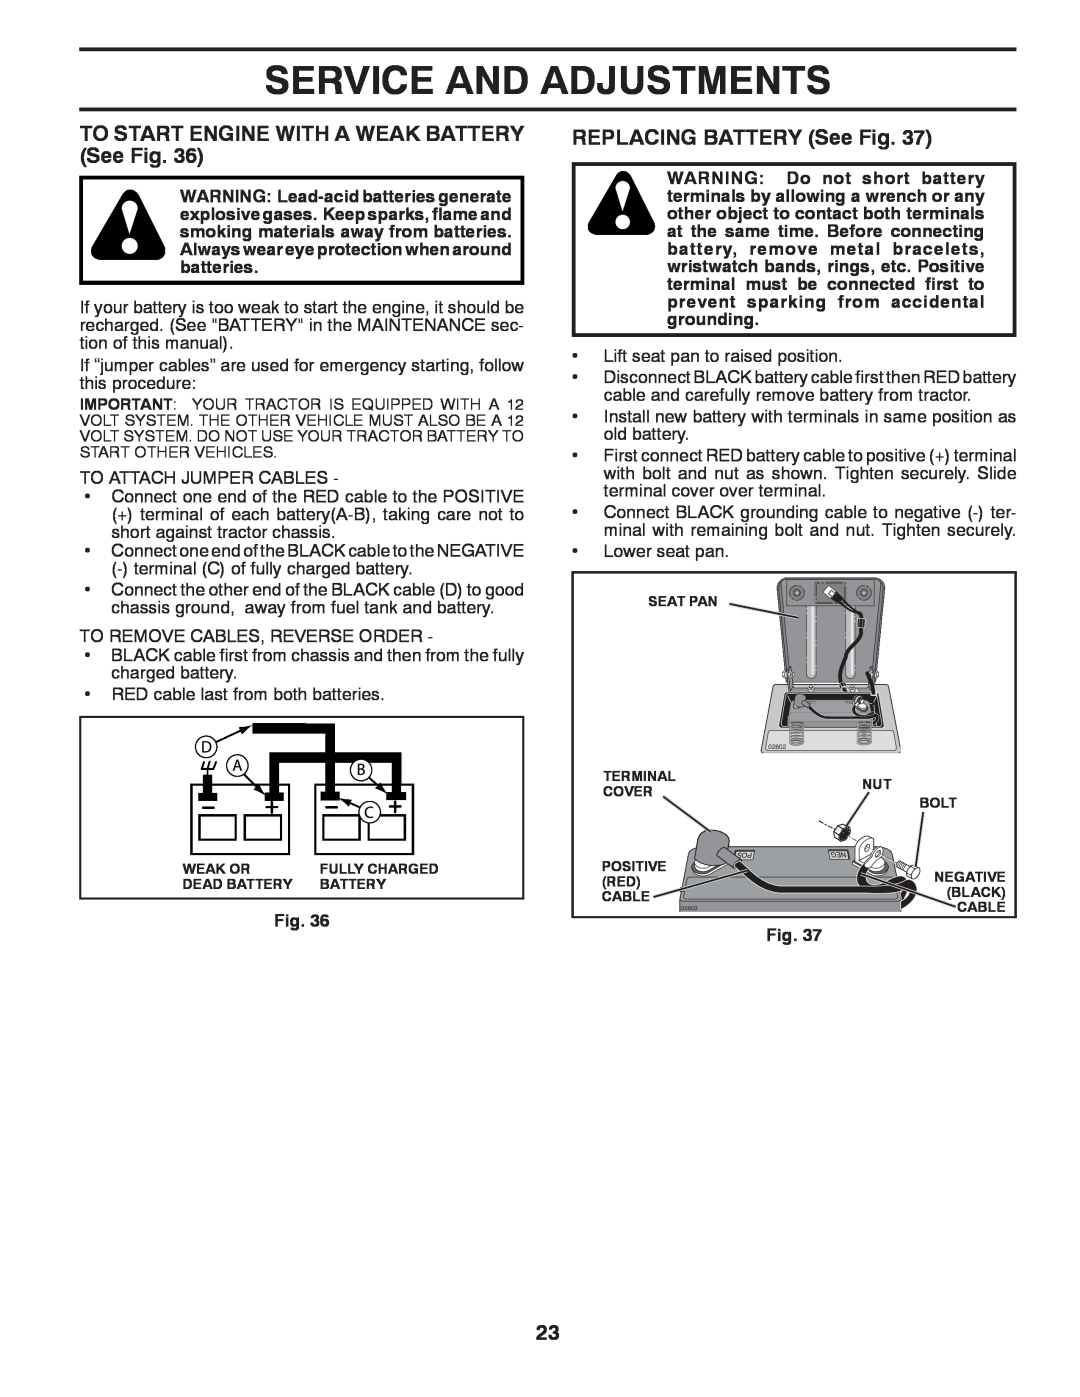 Ariens 935335 42 manual Service And Adjustments, TO START ENGINE WITH A WEAK BATTERY See Fig, REPLACING BATTERY See Fig 